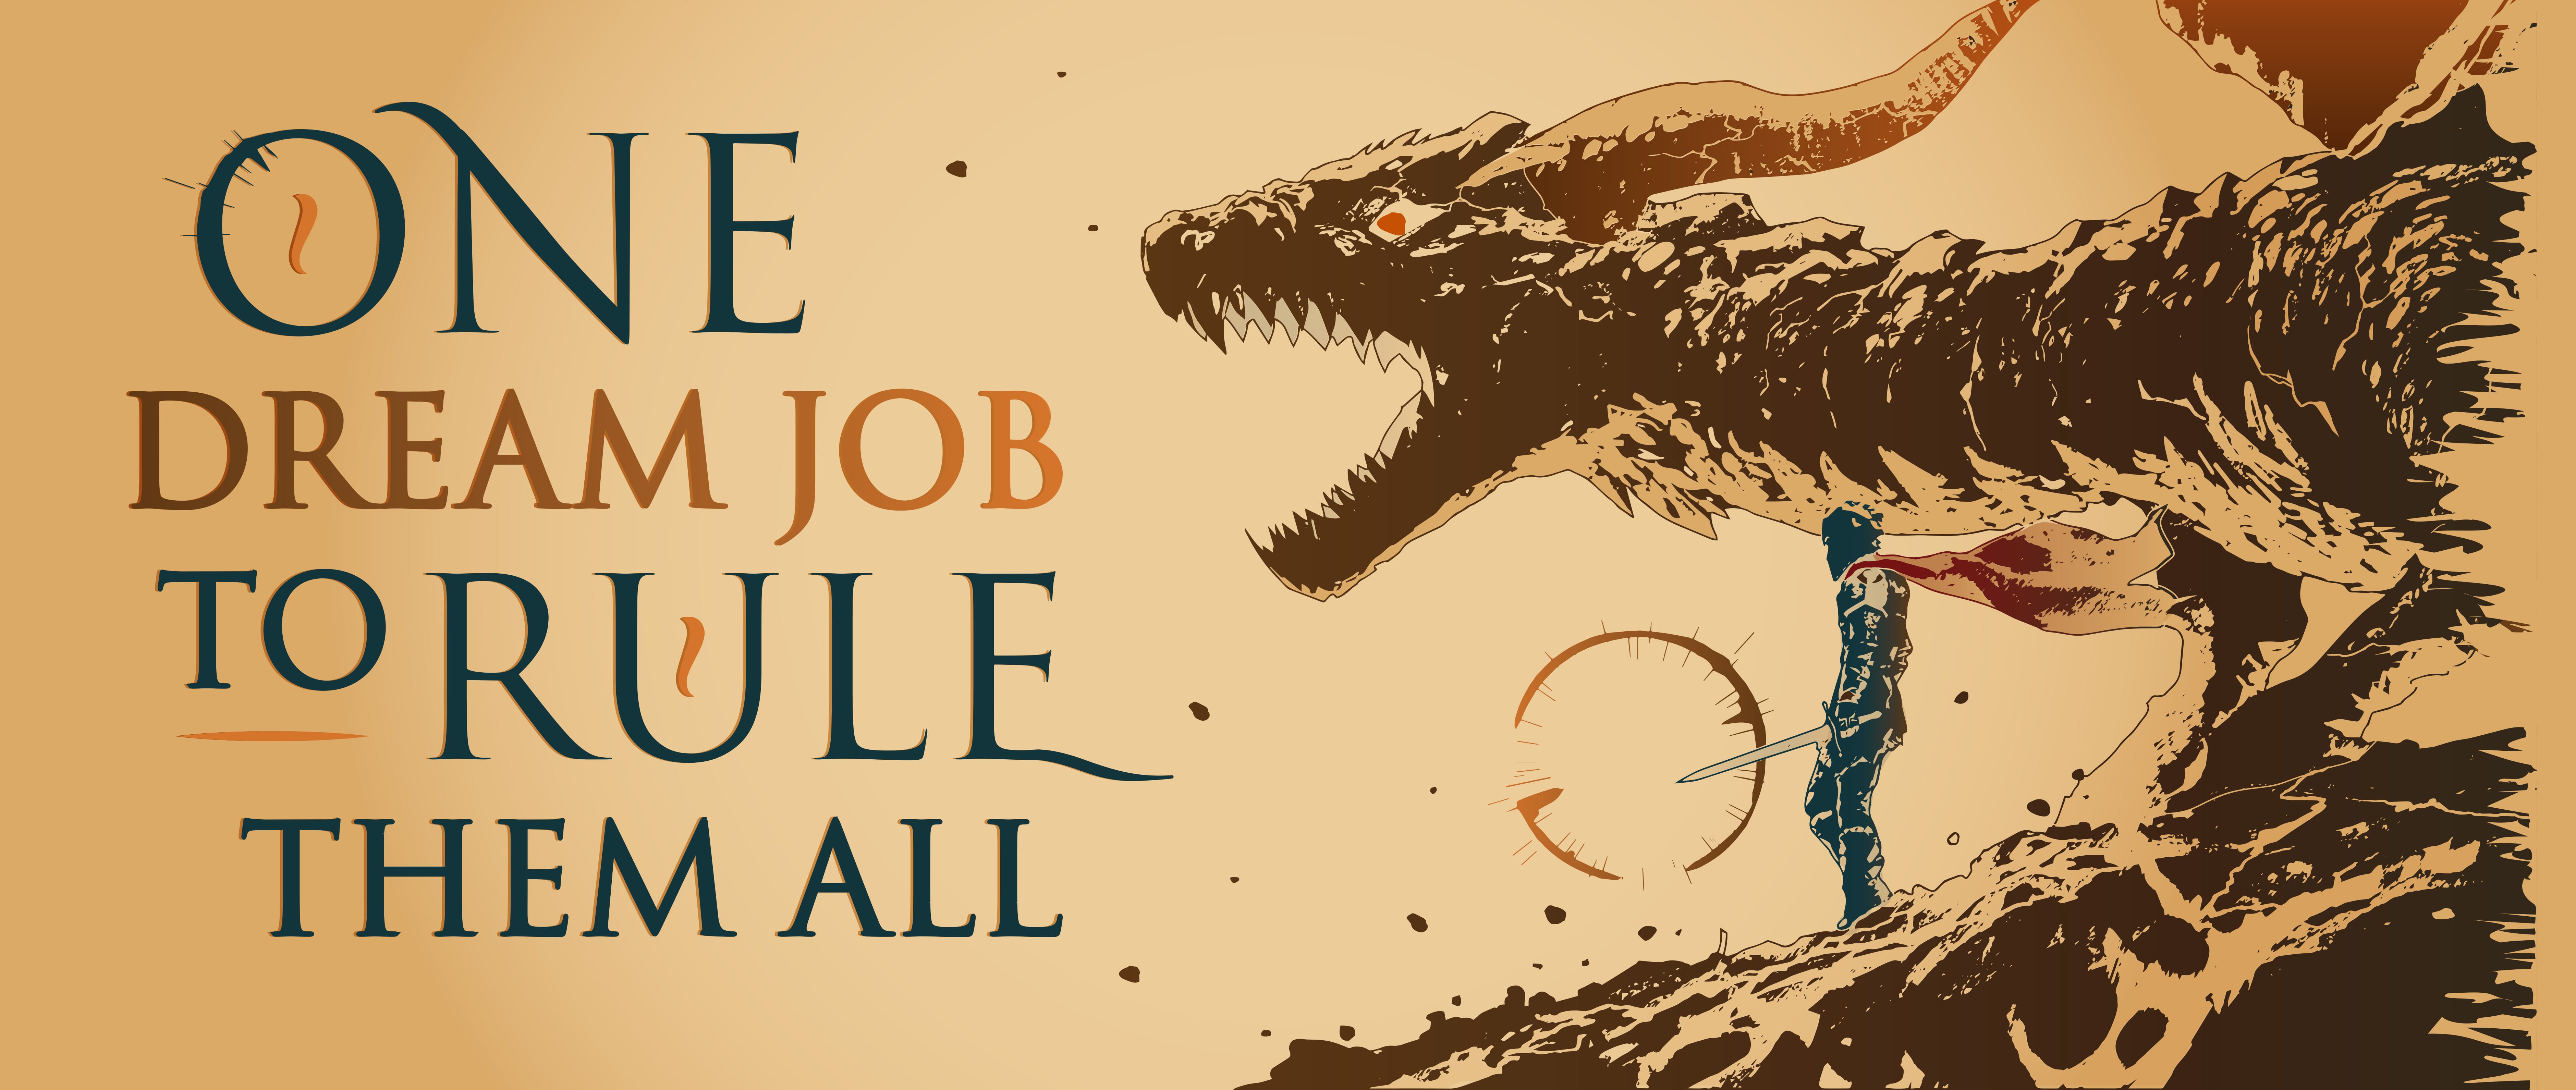 One dream job to rule them all